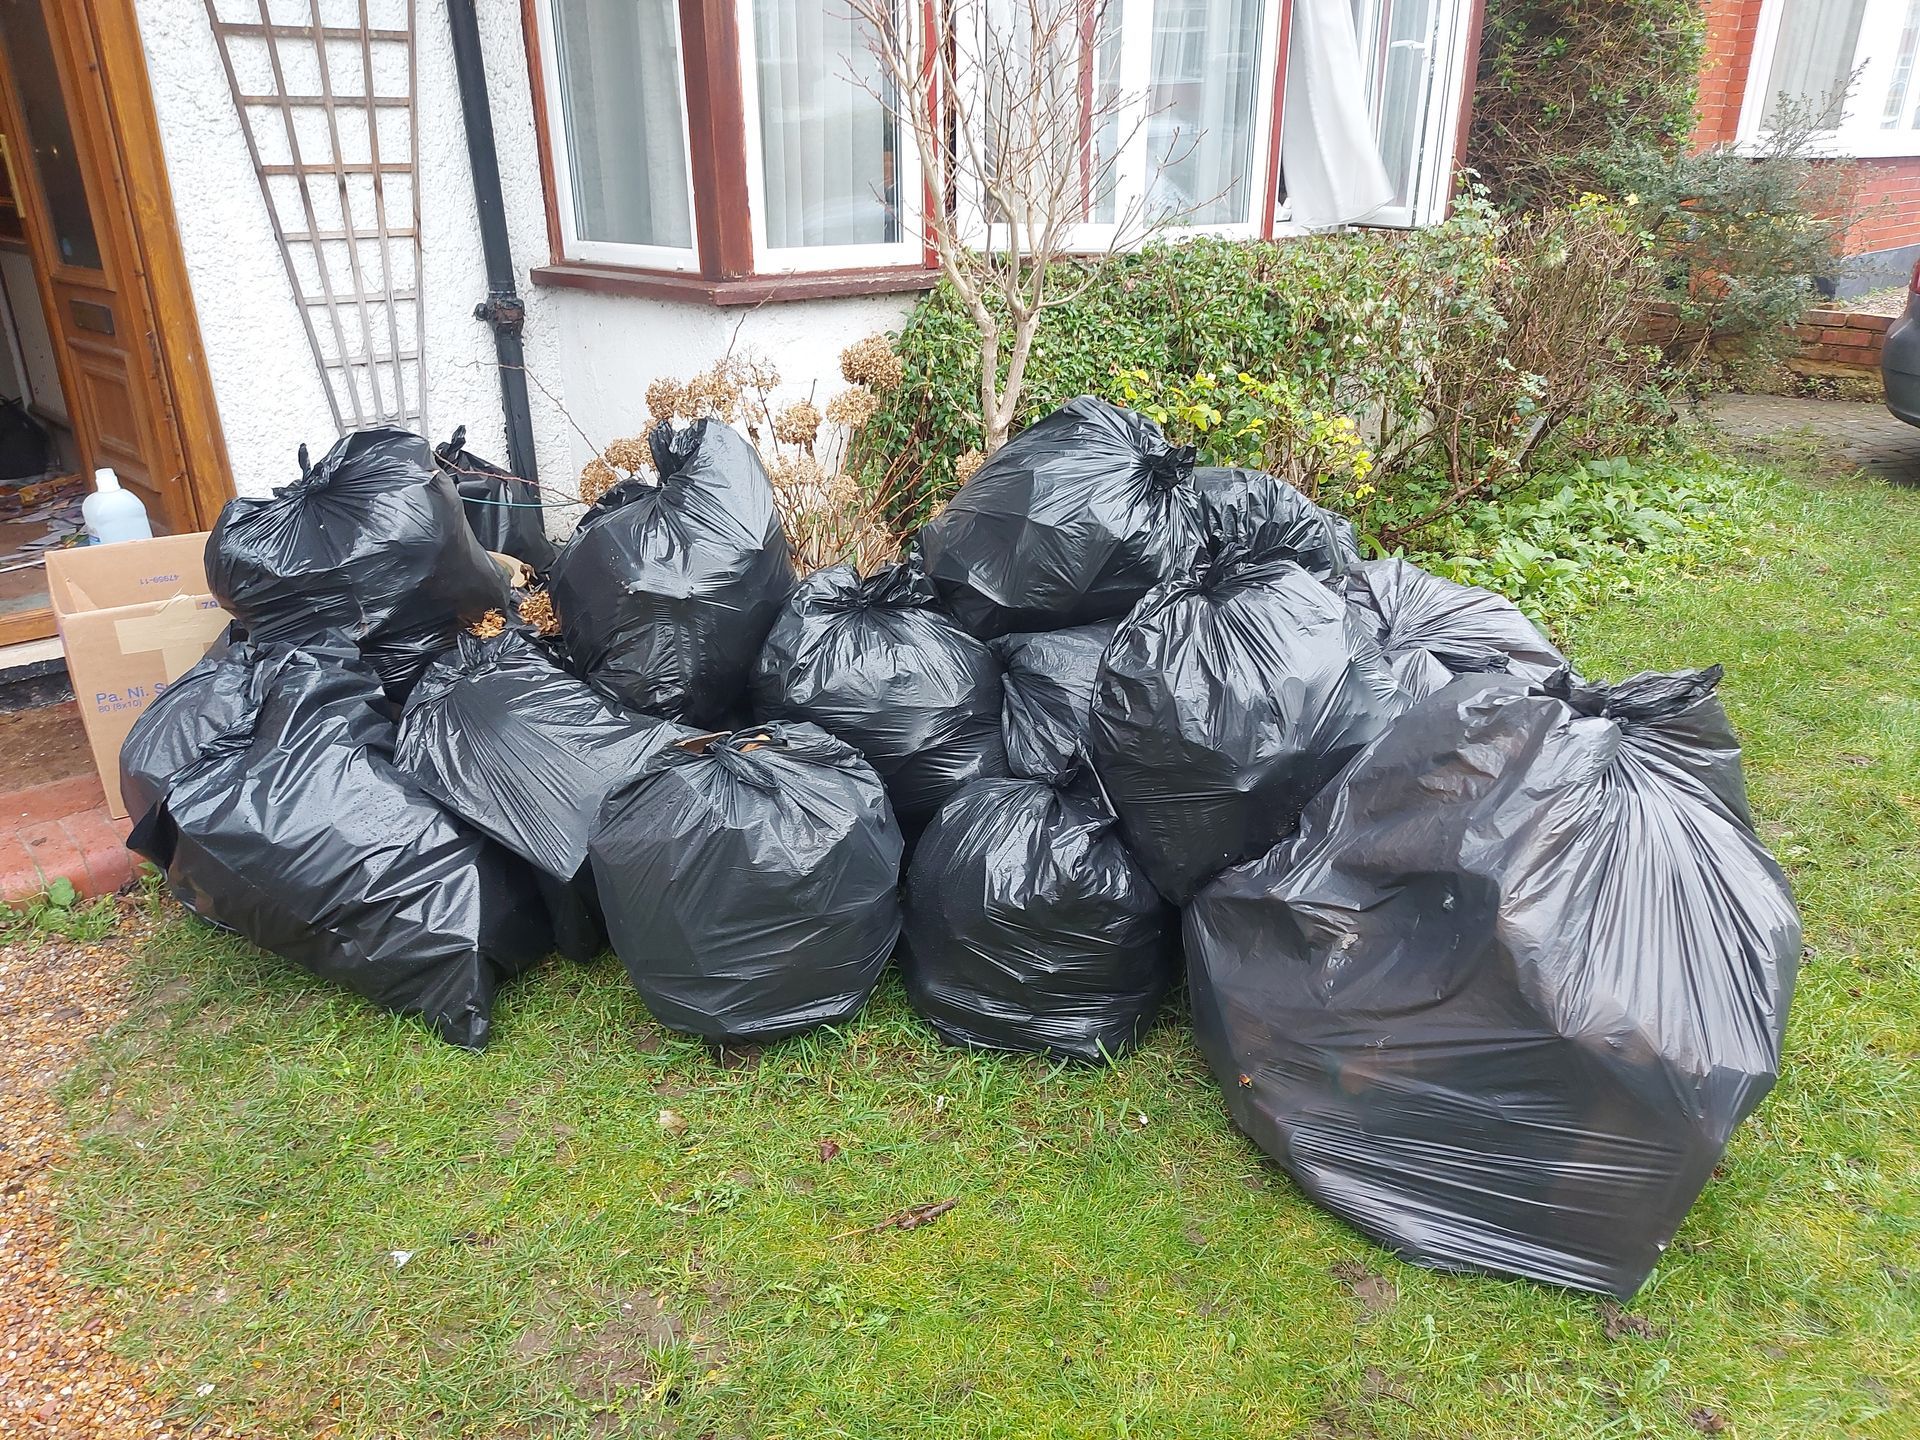 Multiple black bin bags neatly arranged outside a house, awaiting removal. The bags are stacked together, indicating a readiness for clearance and disposal. The image signifies the process of cleaning and organizing, preparing to remove waste and maintain cleanliness around the property